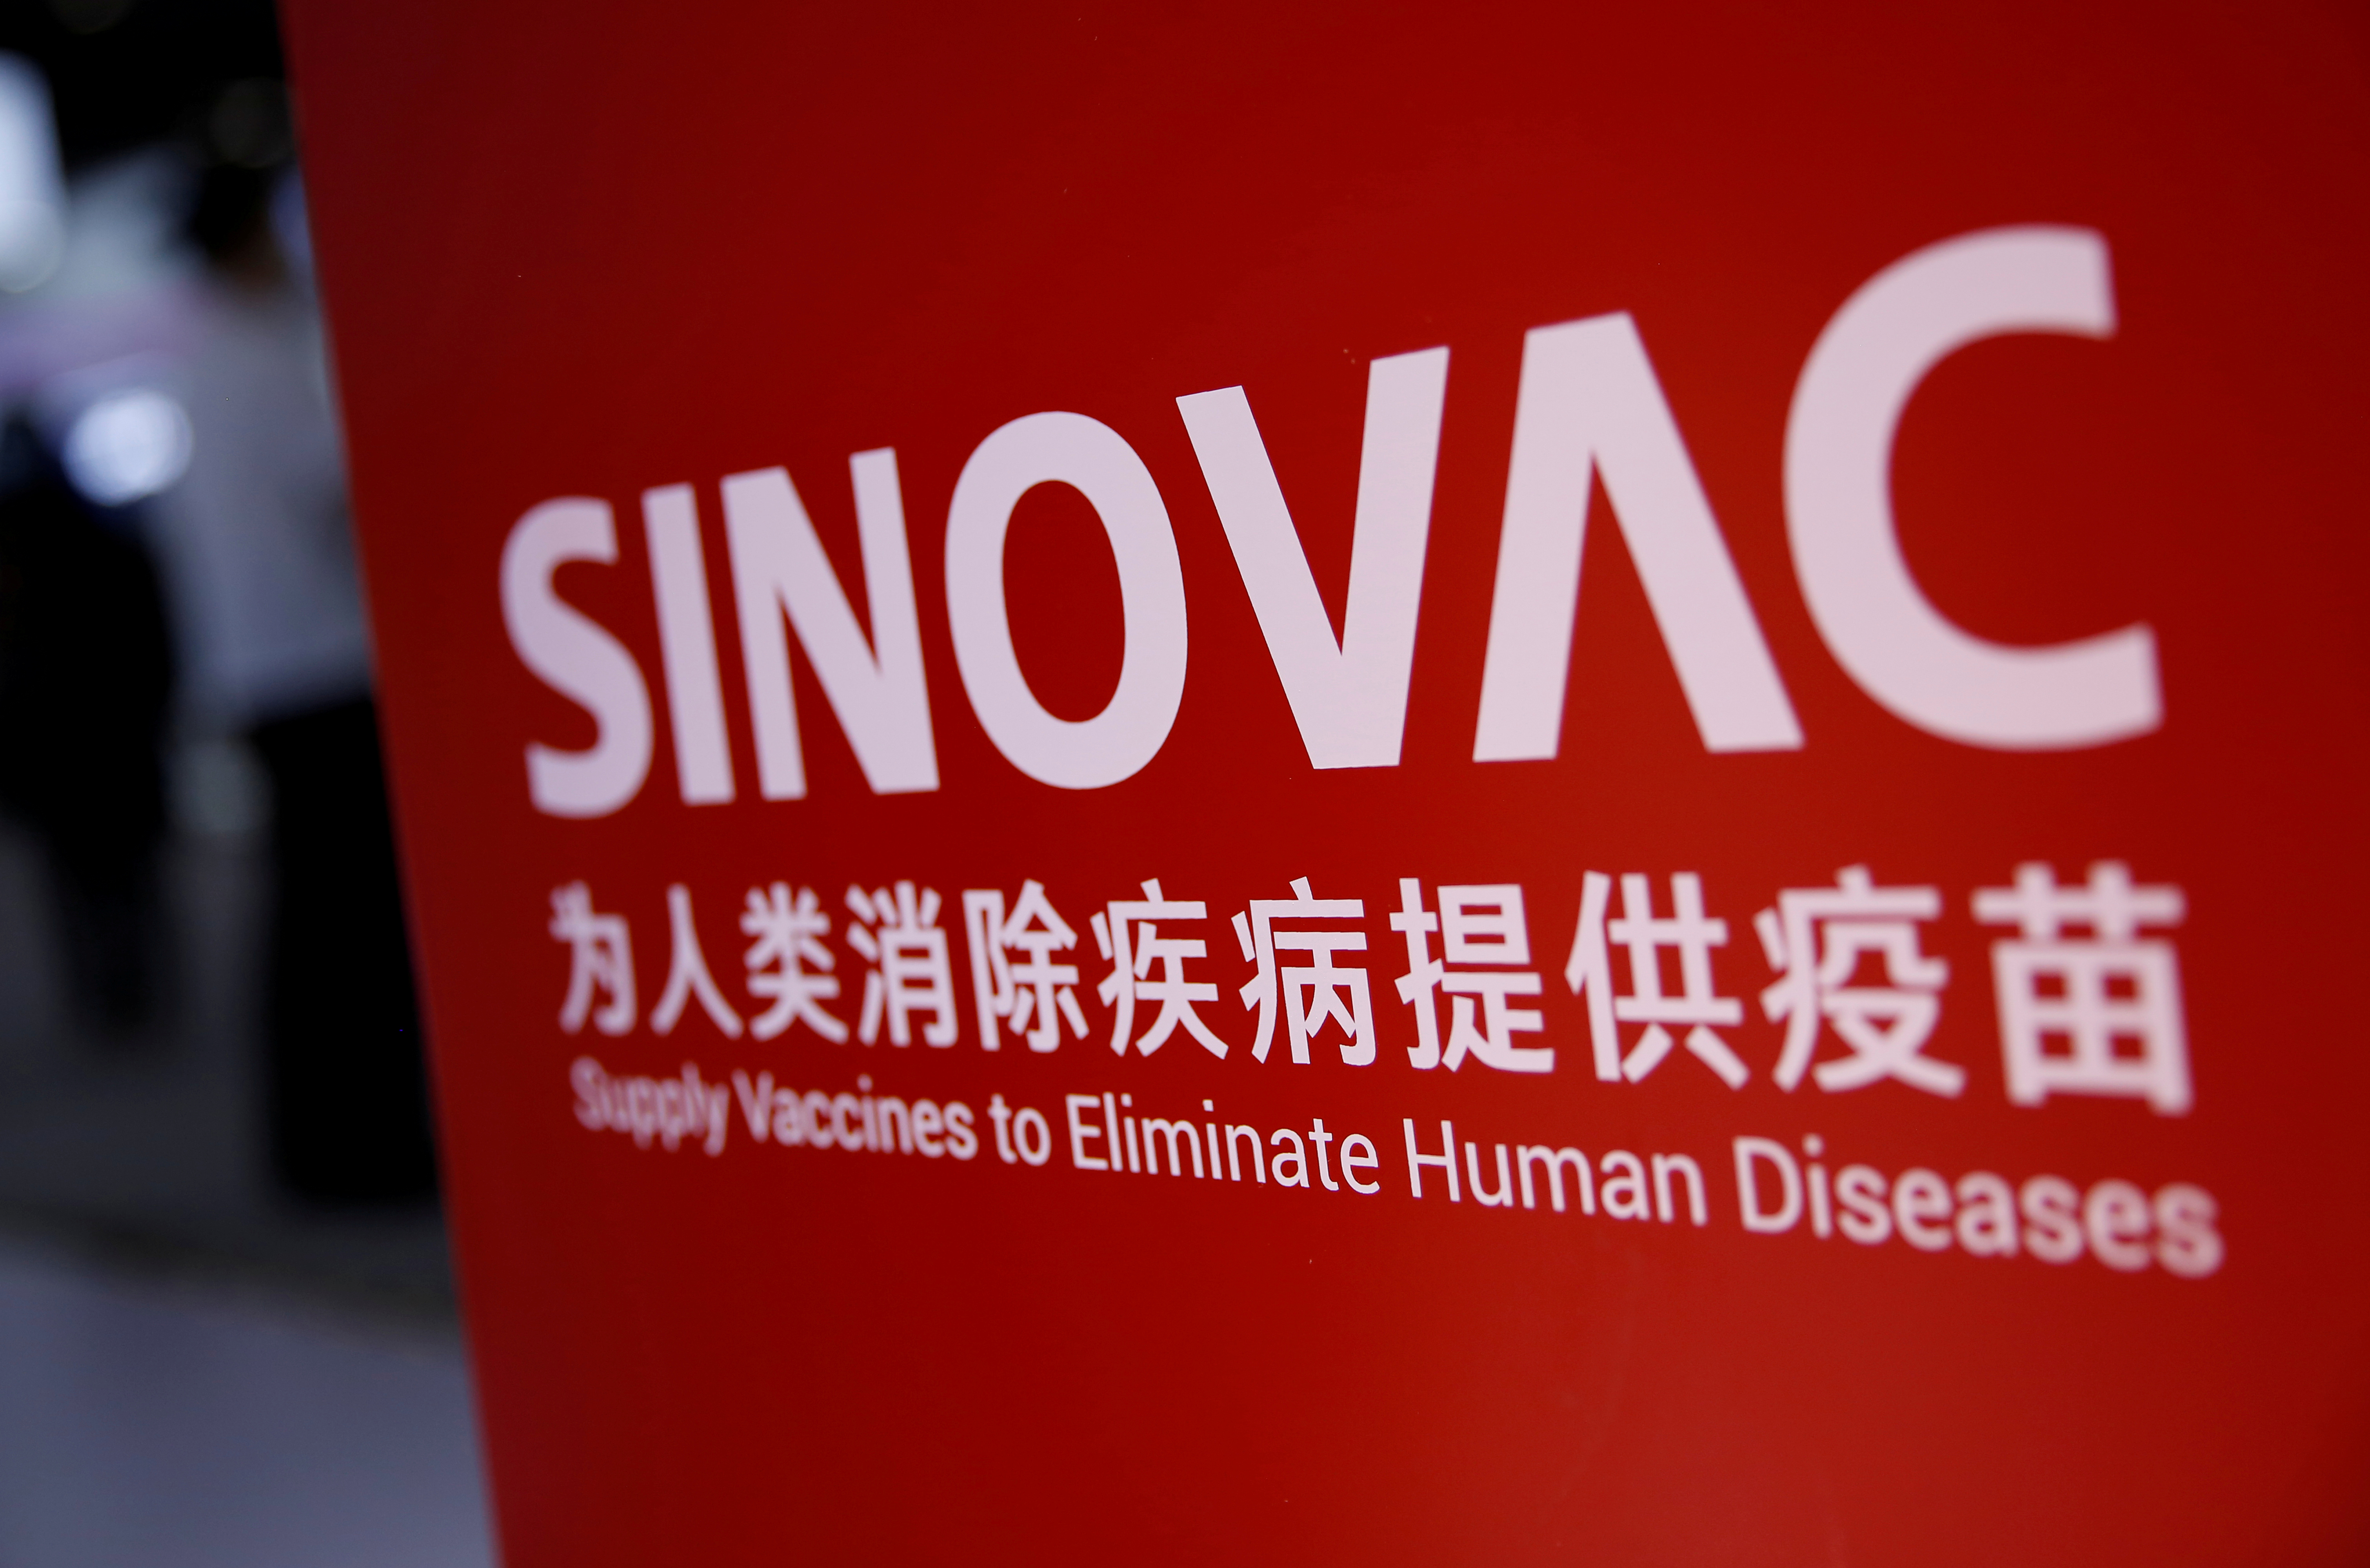 A sign for Sinovac Biotech Ltd is seen at the 2020 China International Fair for Trade in Services (CIFTIS), following the COVID-19 outbreak, in Beijing, China September 5, 2020. Photo: Reuters